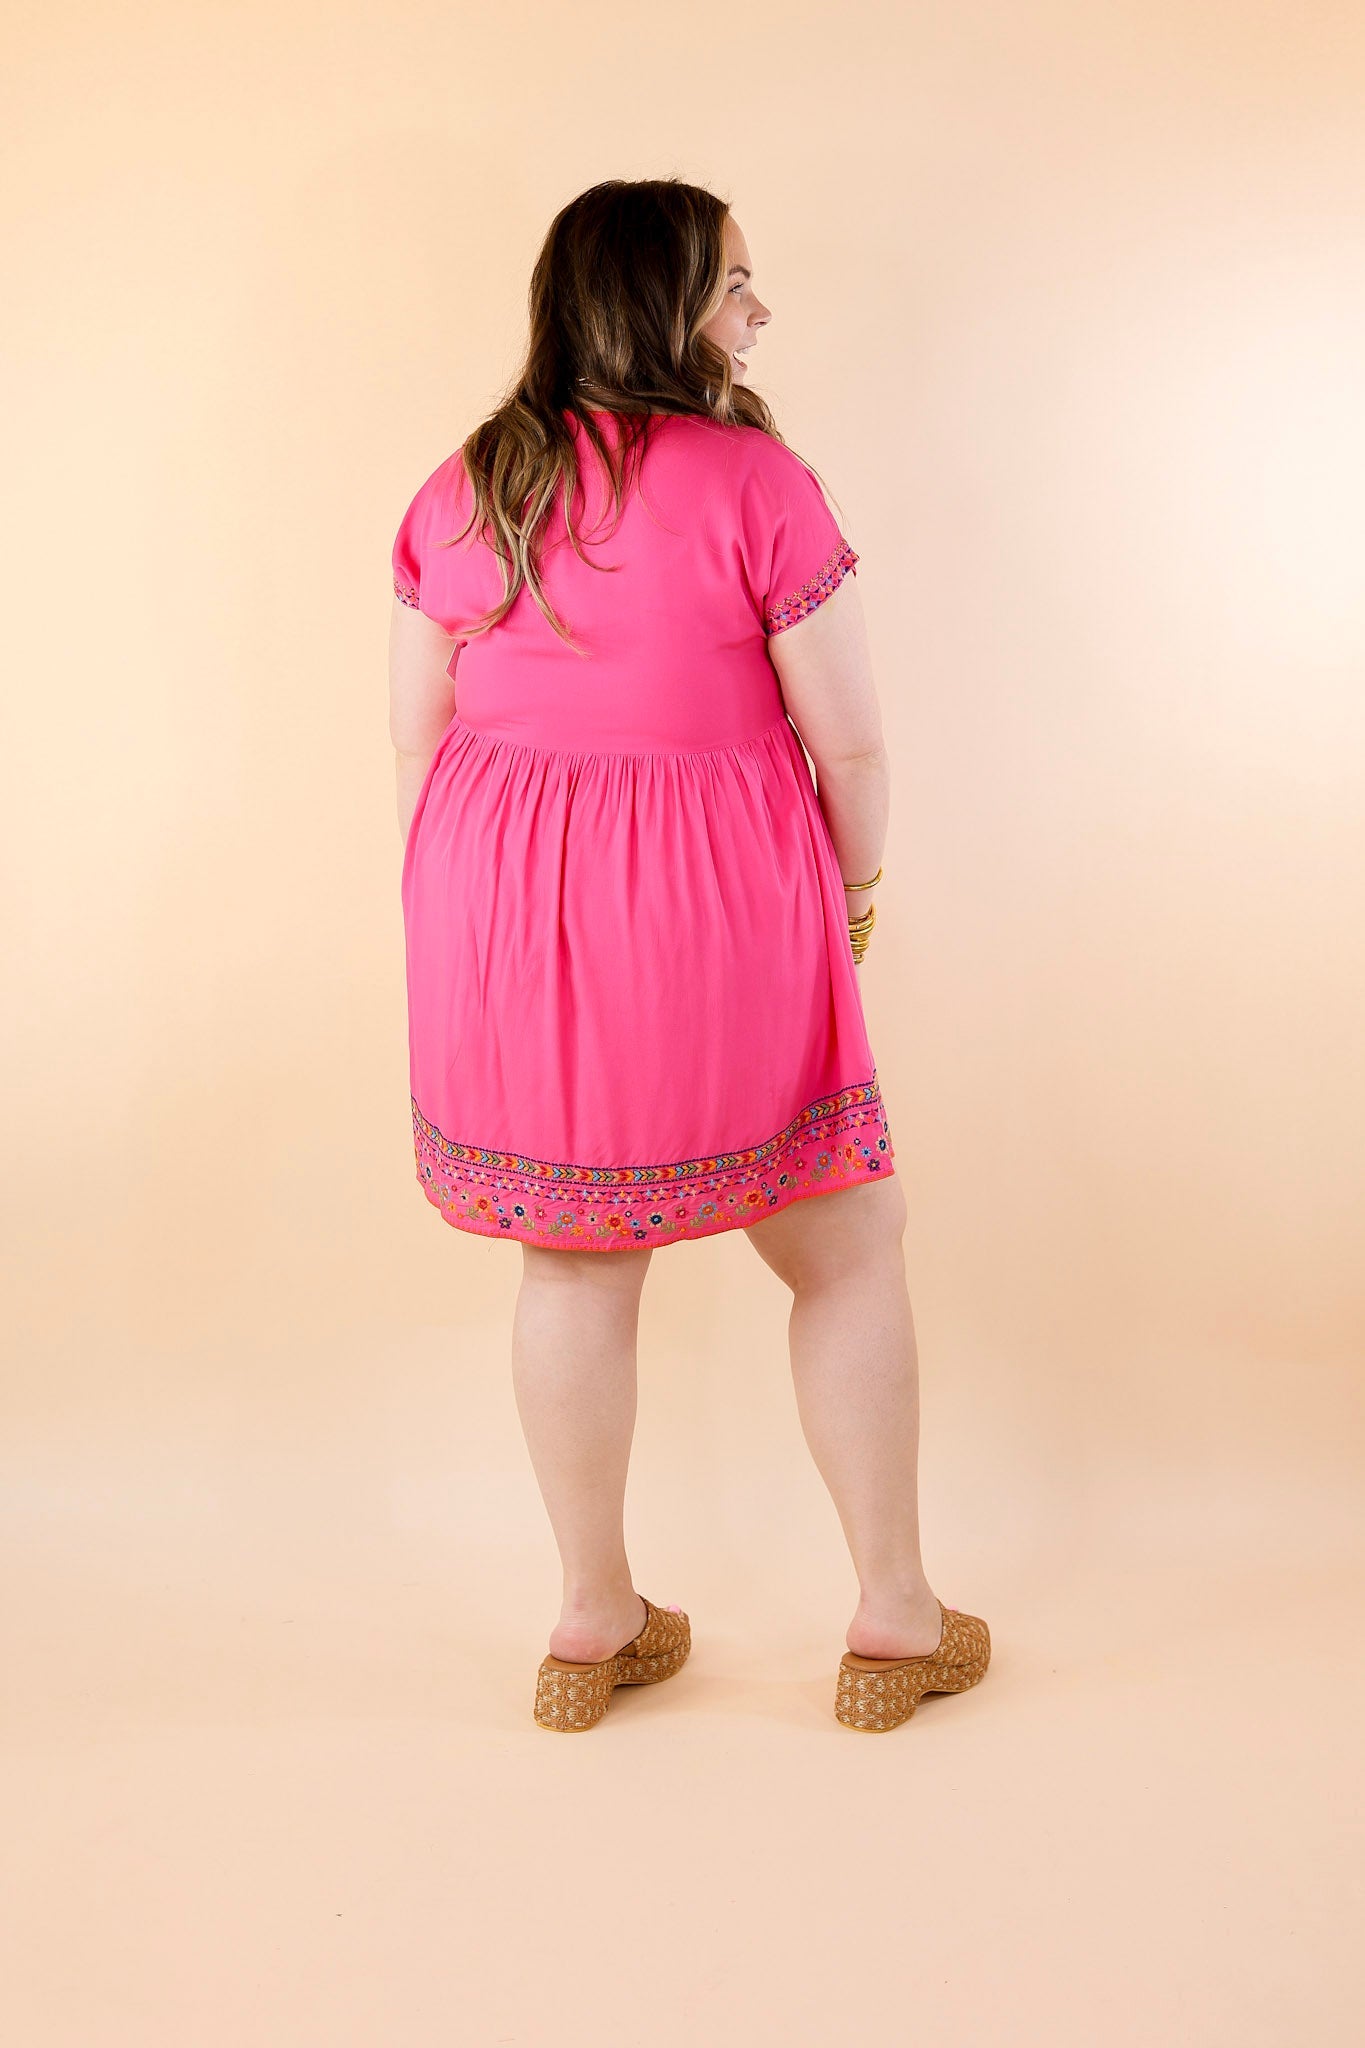 Passing Through V Neck Embroidered Dress with Short Sleeves in Pink - Giddy Up Glamour Boutique